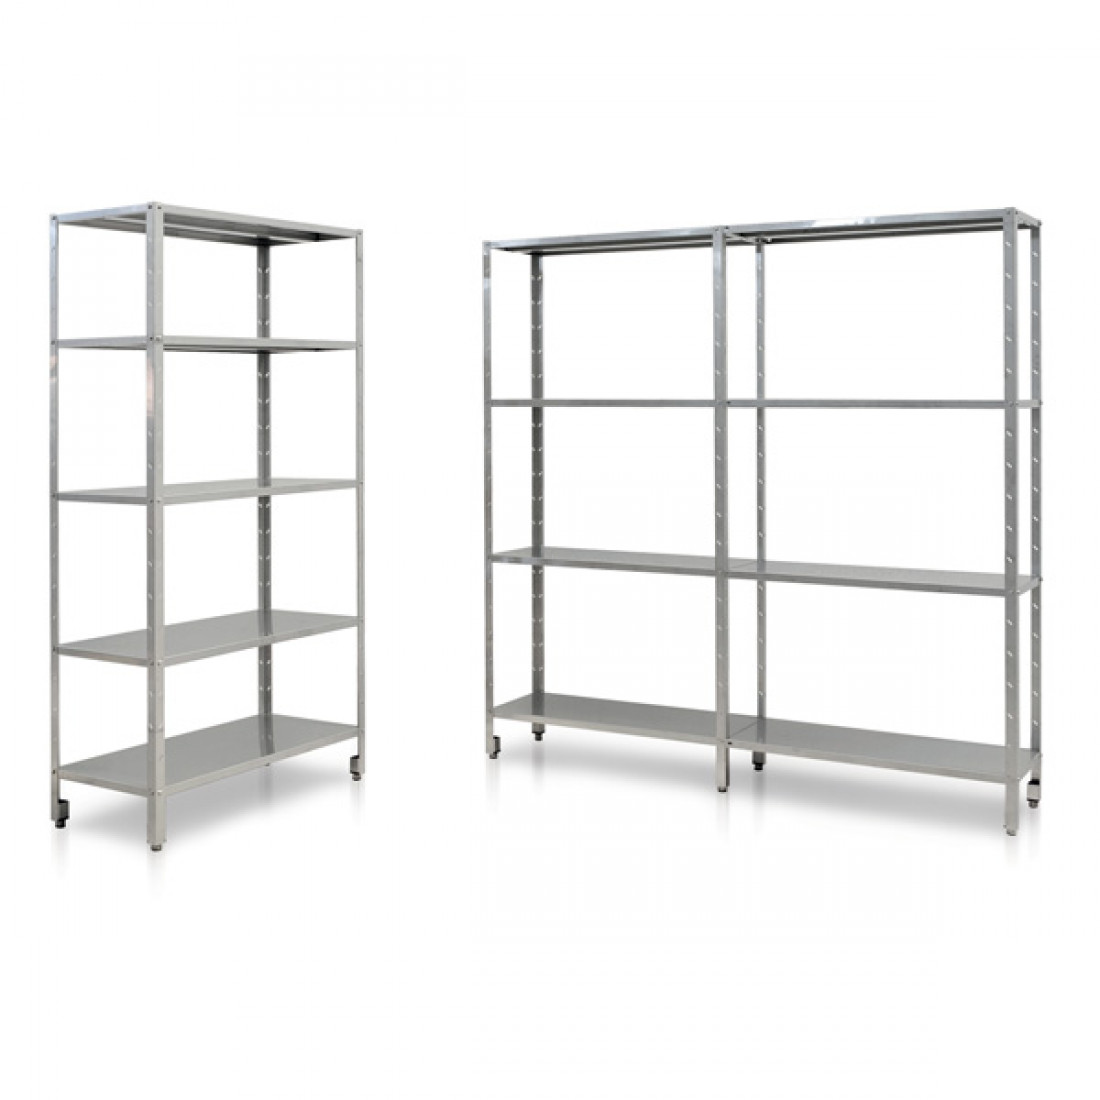 INOX BOLTED SHELVING